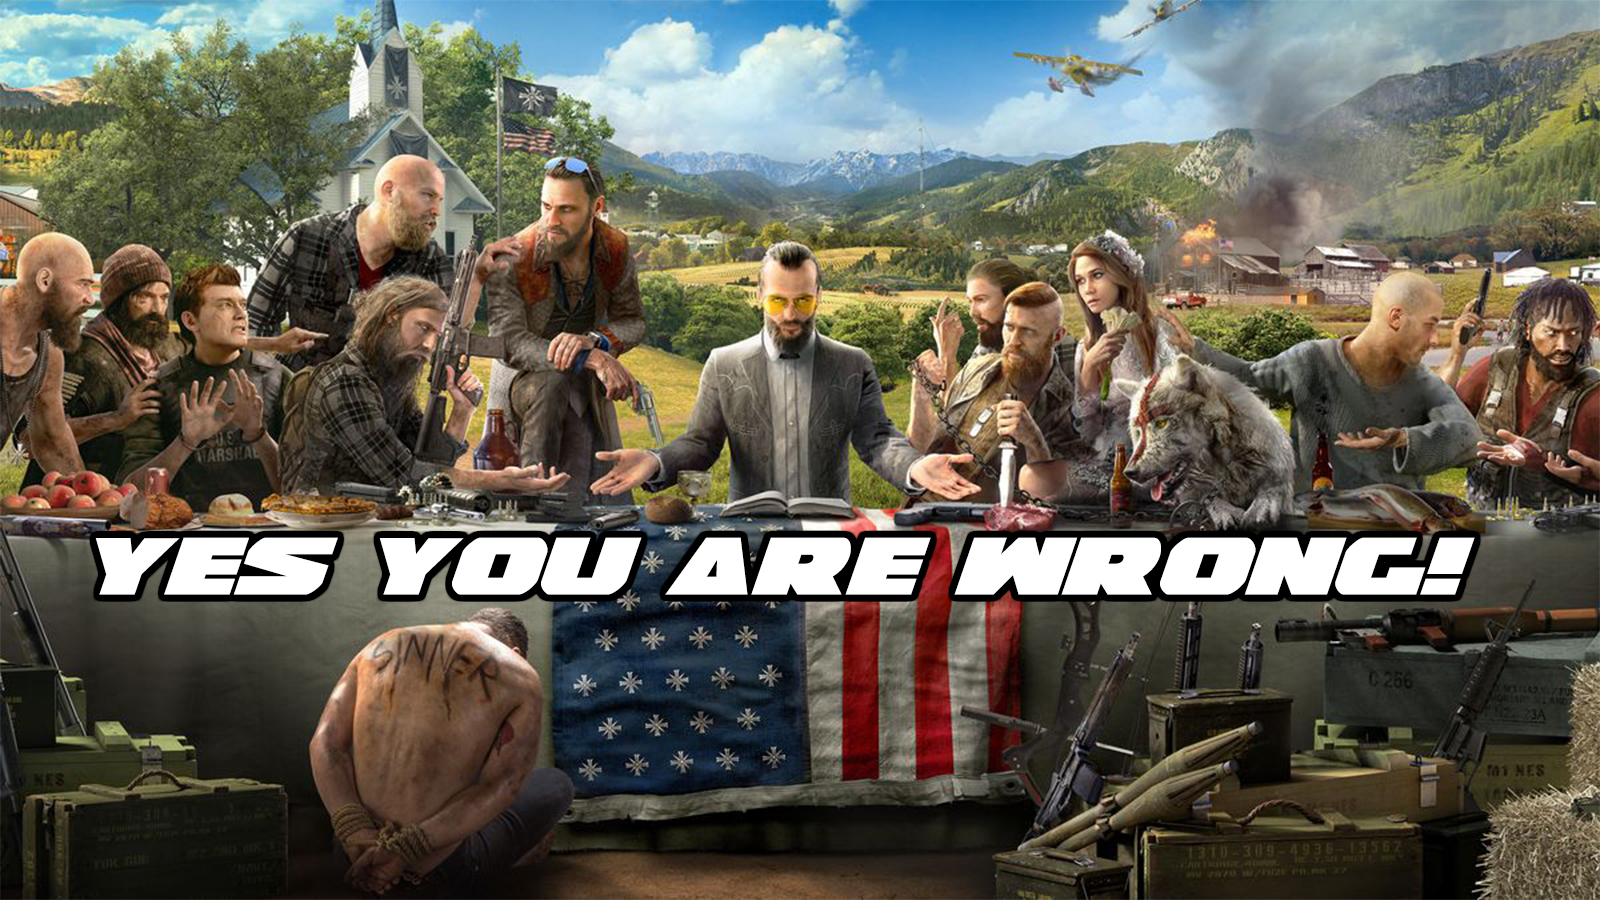 PSA: Far Cry 5 is About America vs Radical Religion